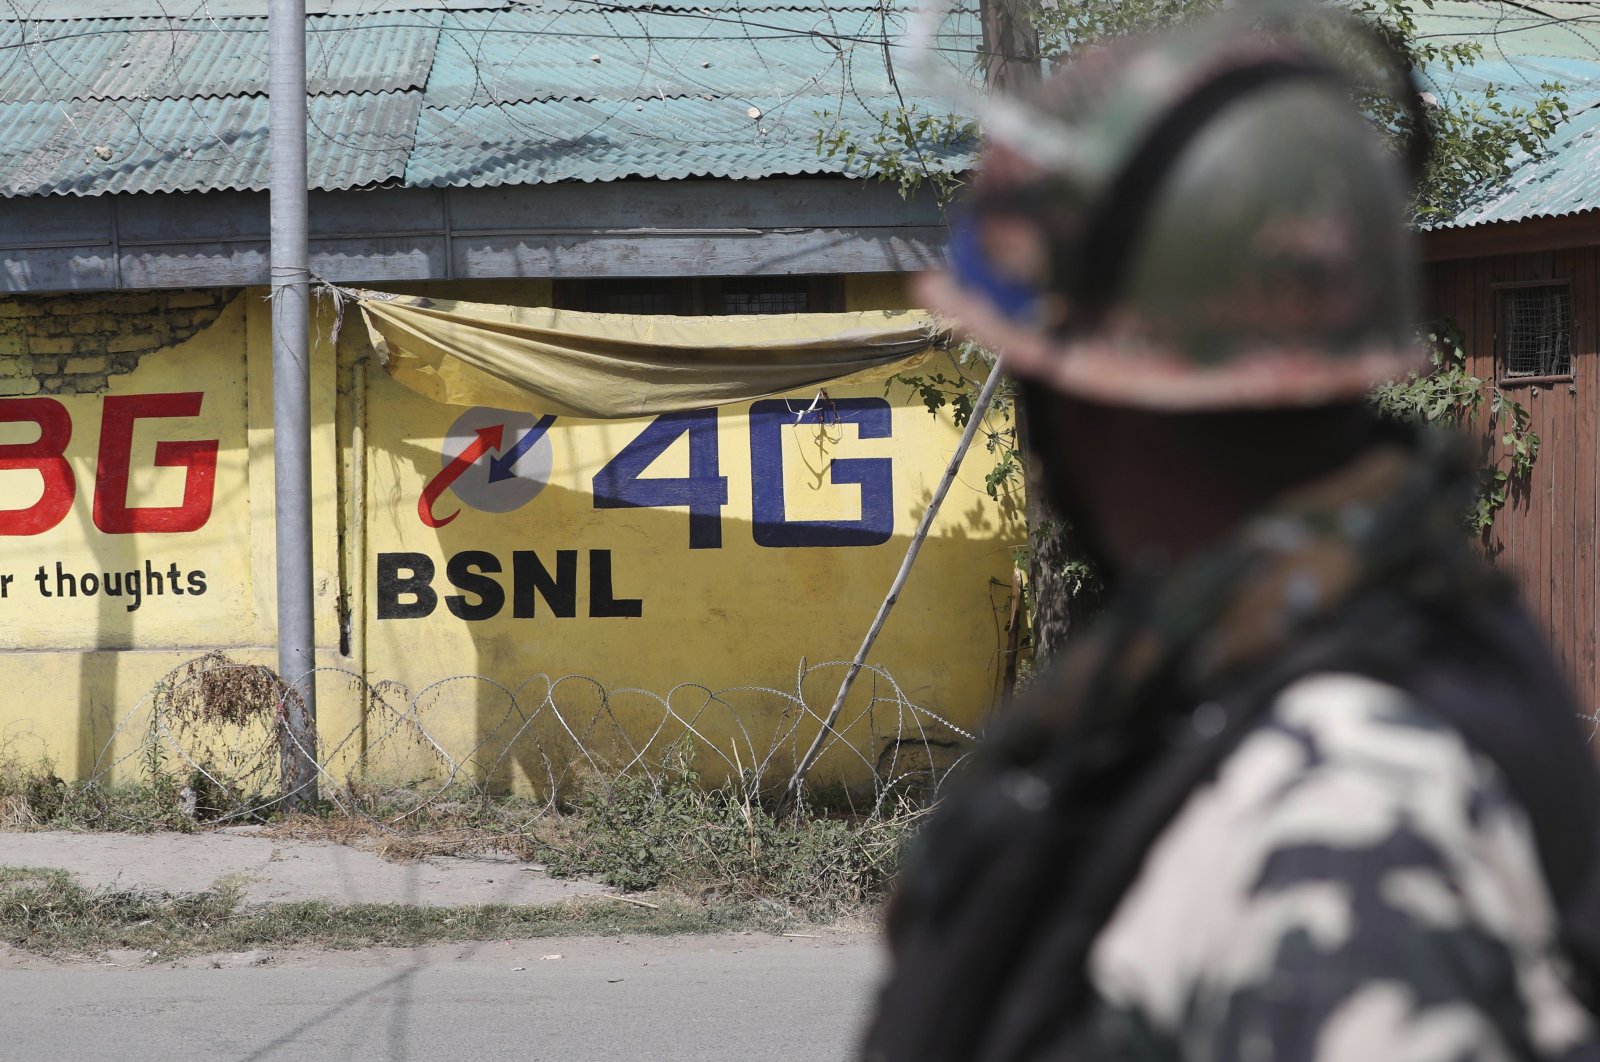 An Indian paramilitary soldier keeps guard outside the main telephone exchange building in Srinagar, Indian controlled Kashmir, Sept. 5, 2019. (AP Photo)